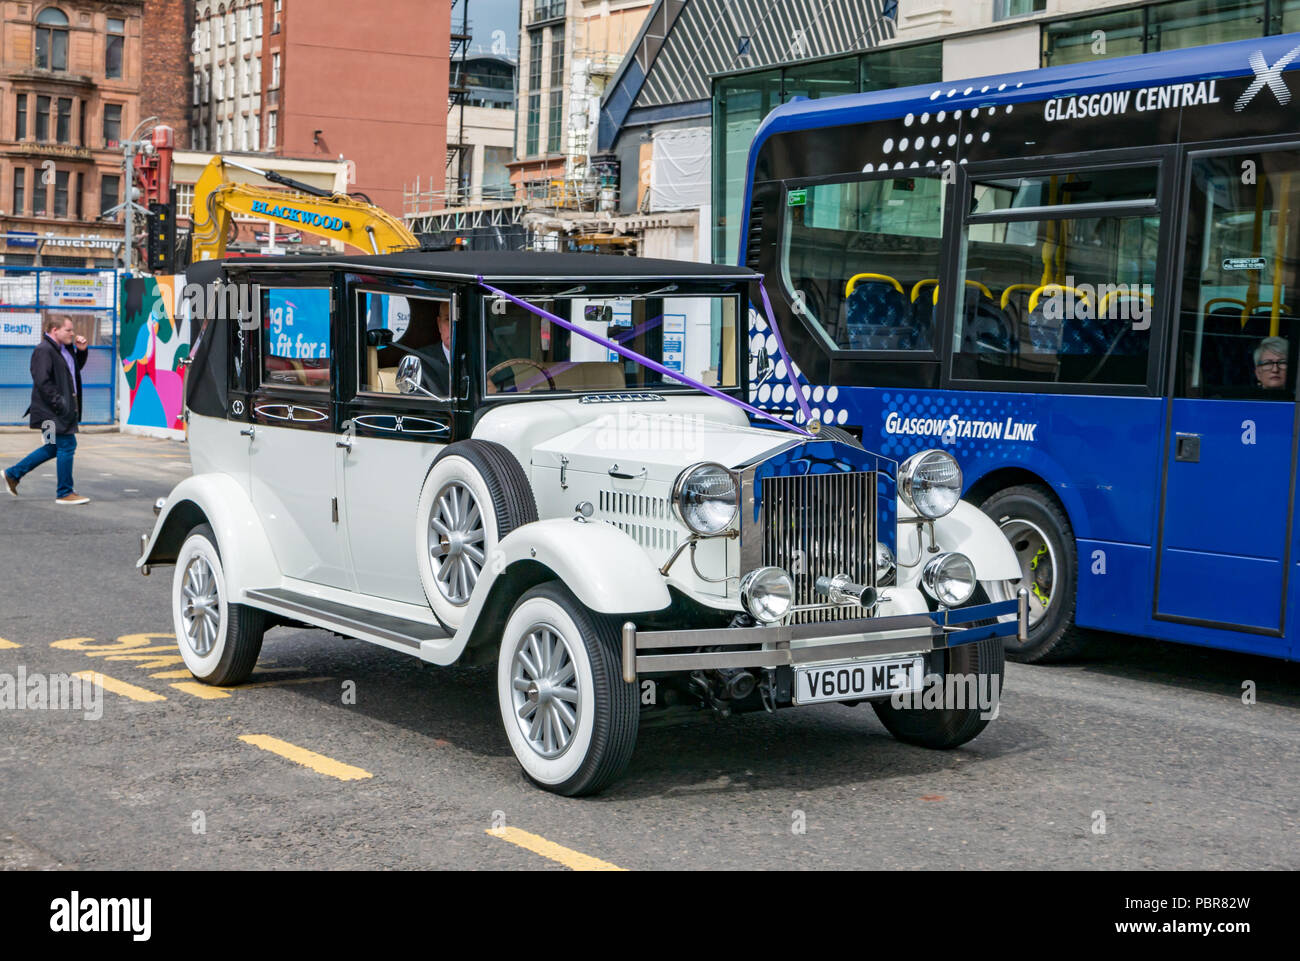 White Imperial Viscount 1930s vintage style 7 seater launderlette car decorated for wedding next to Queen Street station and bus, George Square, Glasgow, Scotland, UK Stock Photo